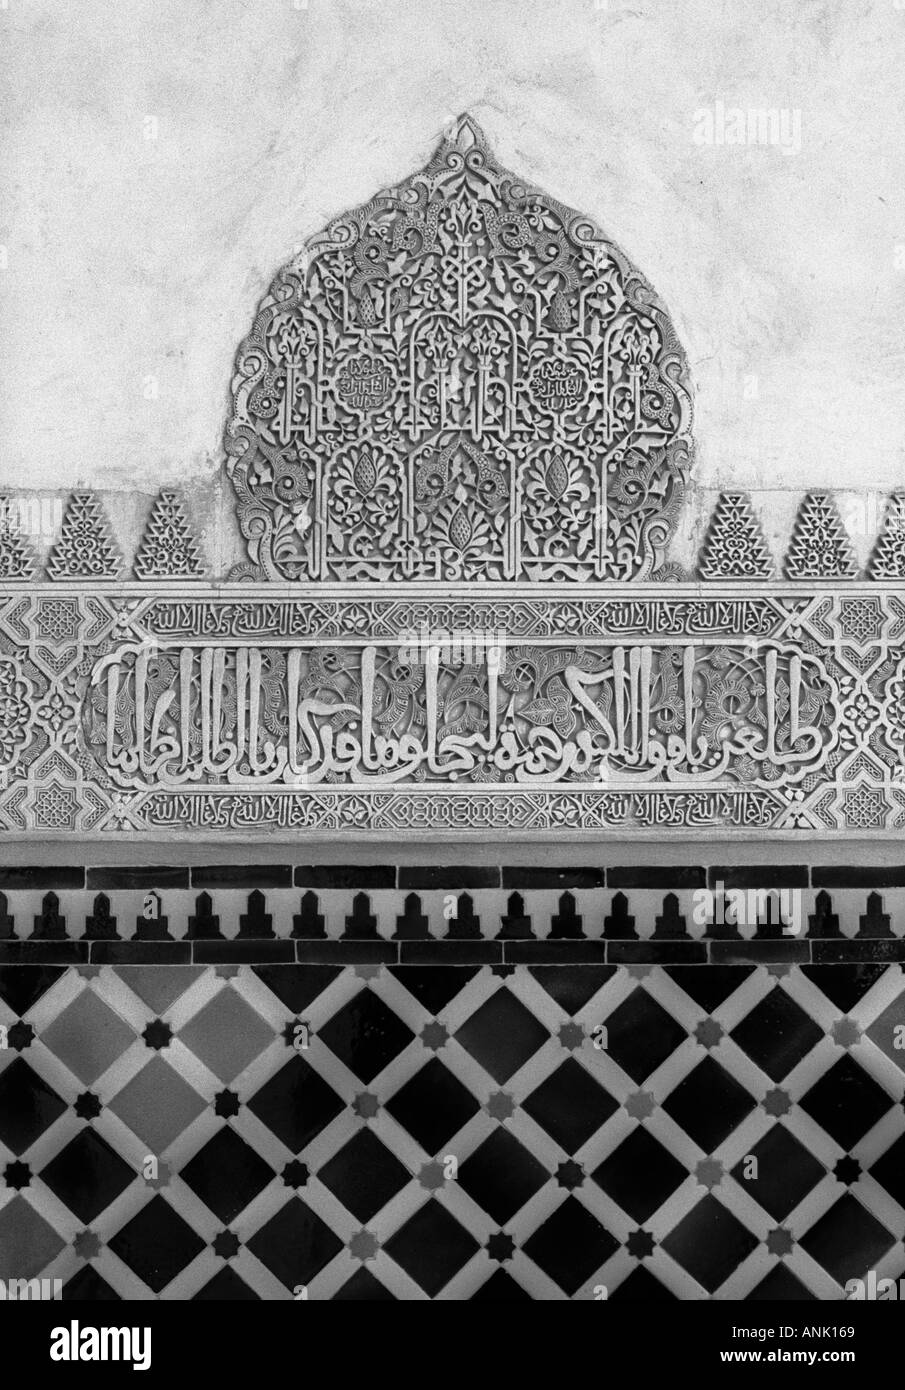 Alhambra Palace Granada Spain Carving on one of the walls of the Court of the Myrtles Built by the Moors Stock Photo